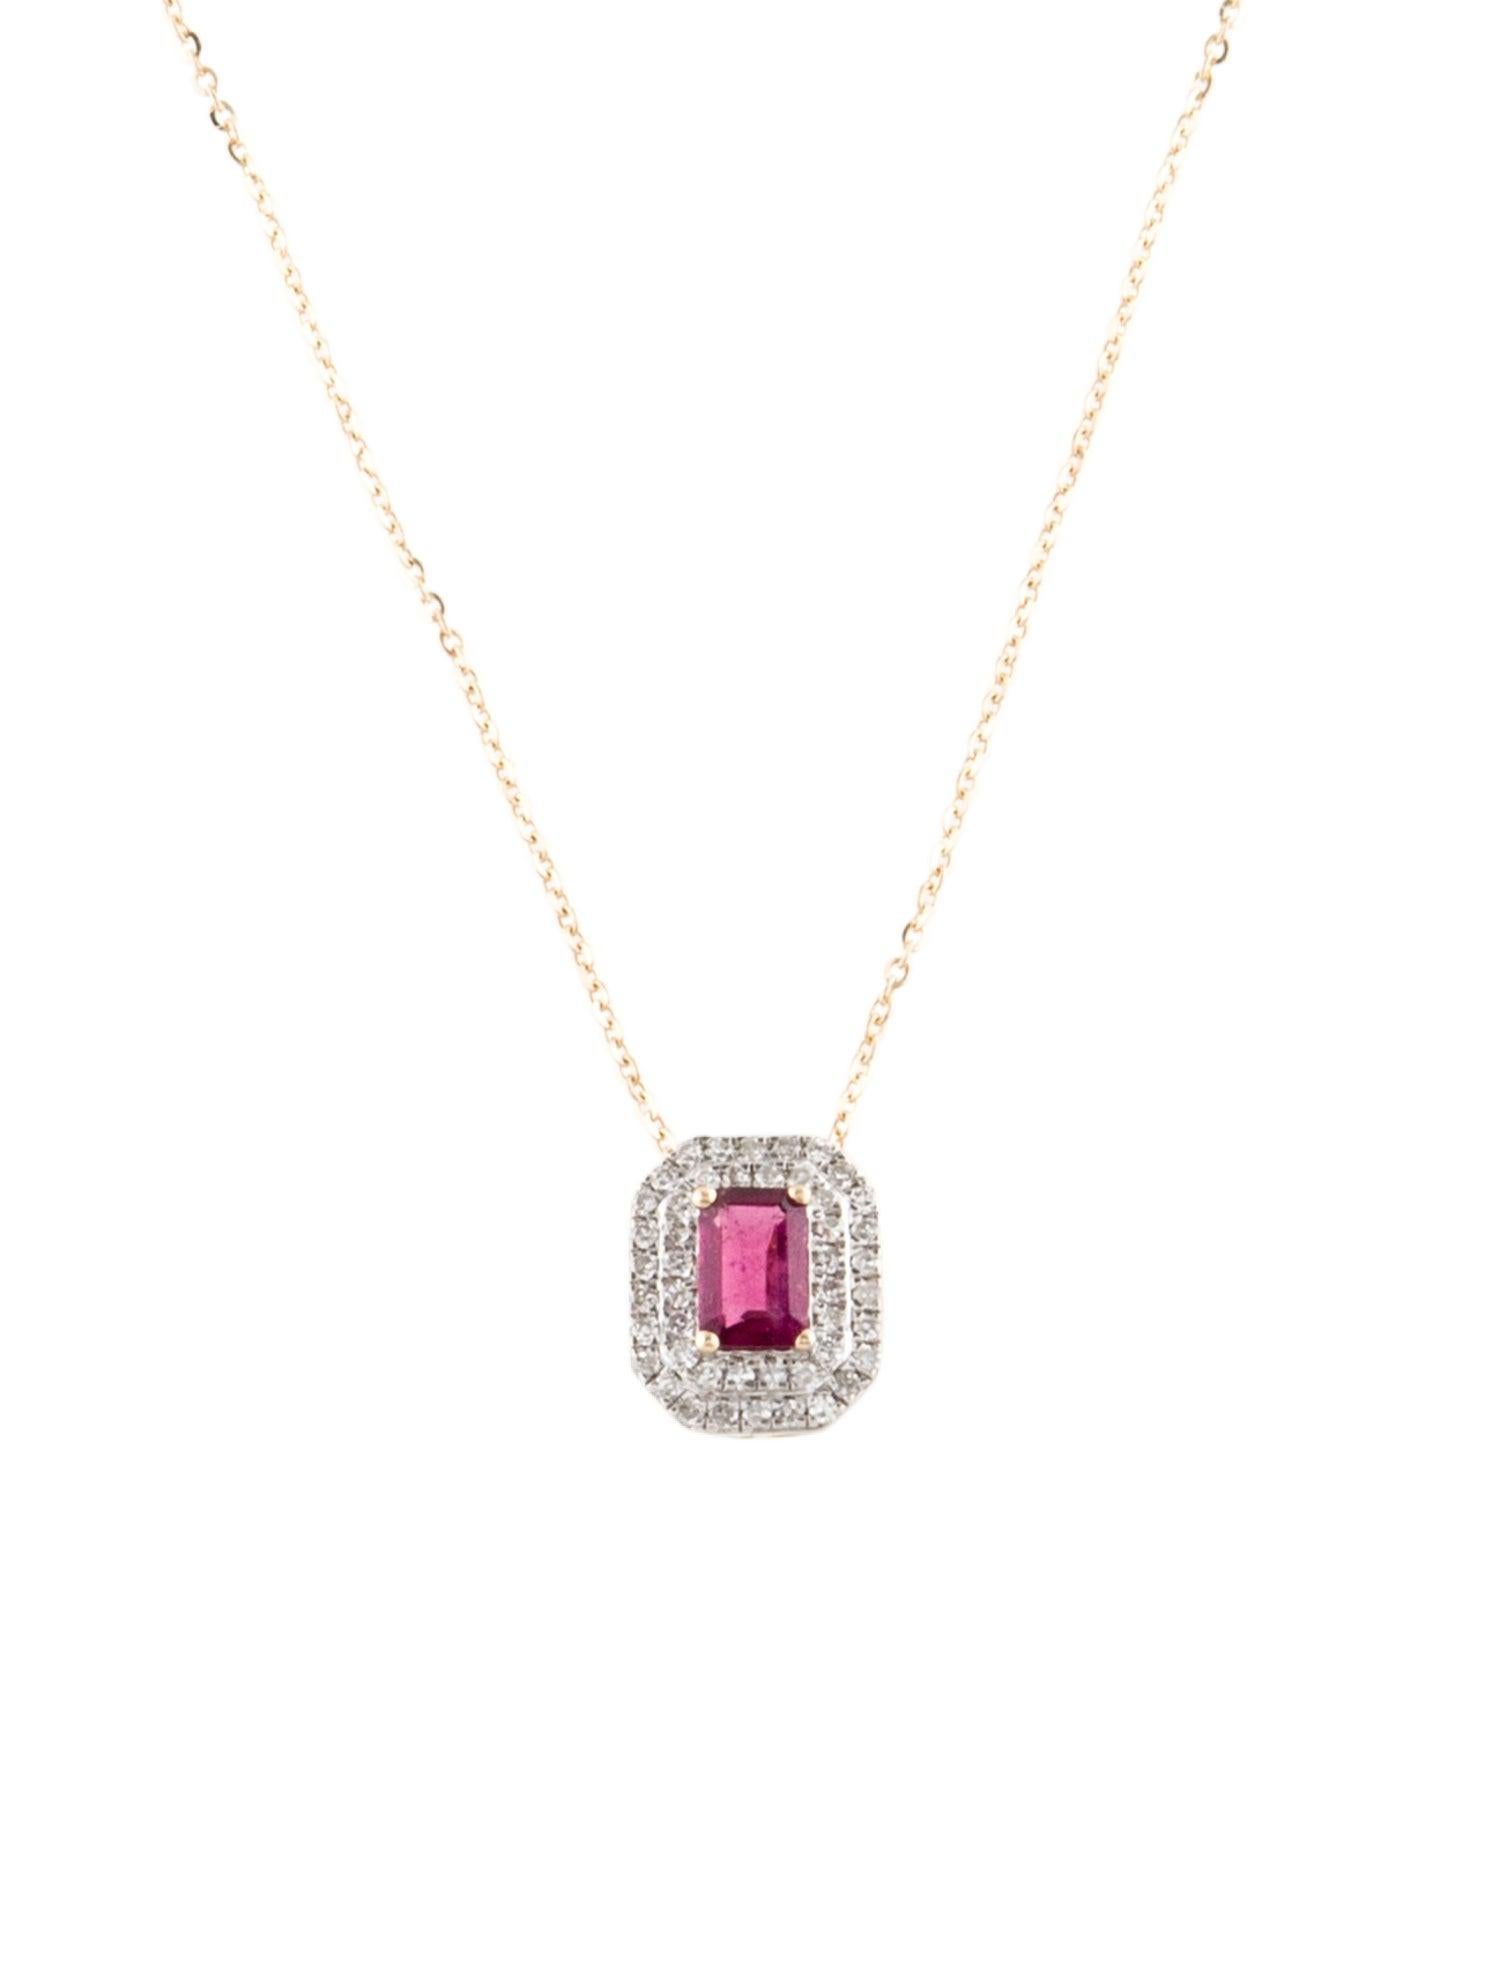 Immerse yourself in the mesmerizing allure of the Rose Radiance pendant from our Vibrant Pink Treasures collection by Jeweltique. A celebration of the captivating Rubellite, reminiscent of the depths of the sea and the vibrancy of a blooming rose,